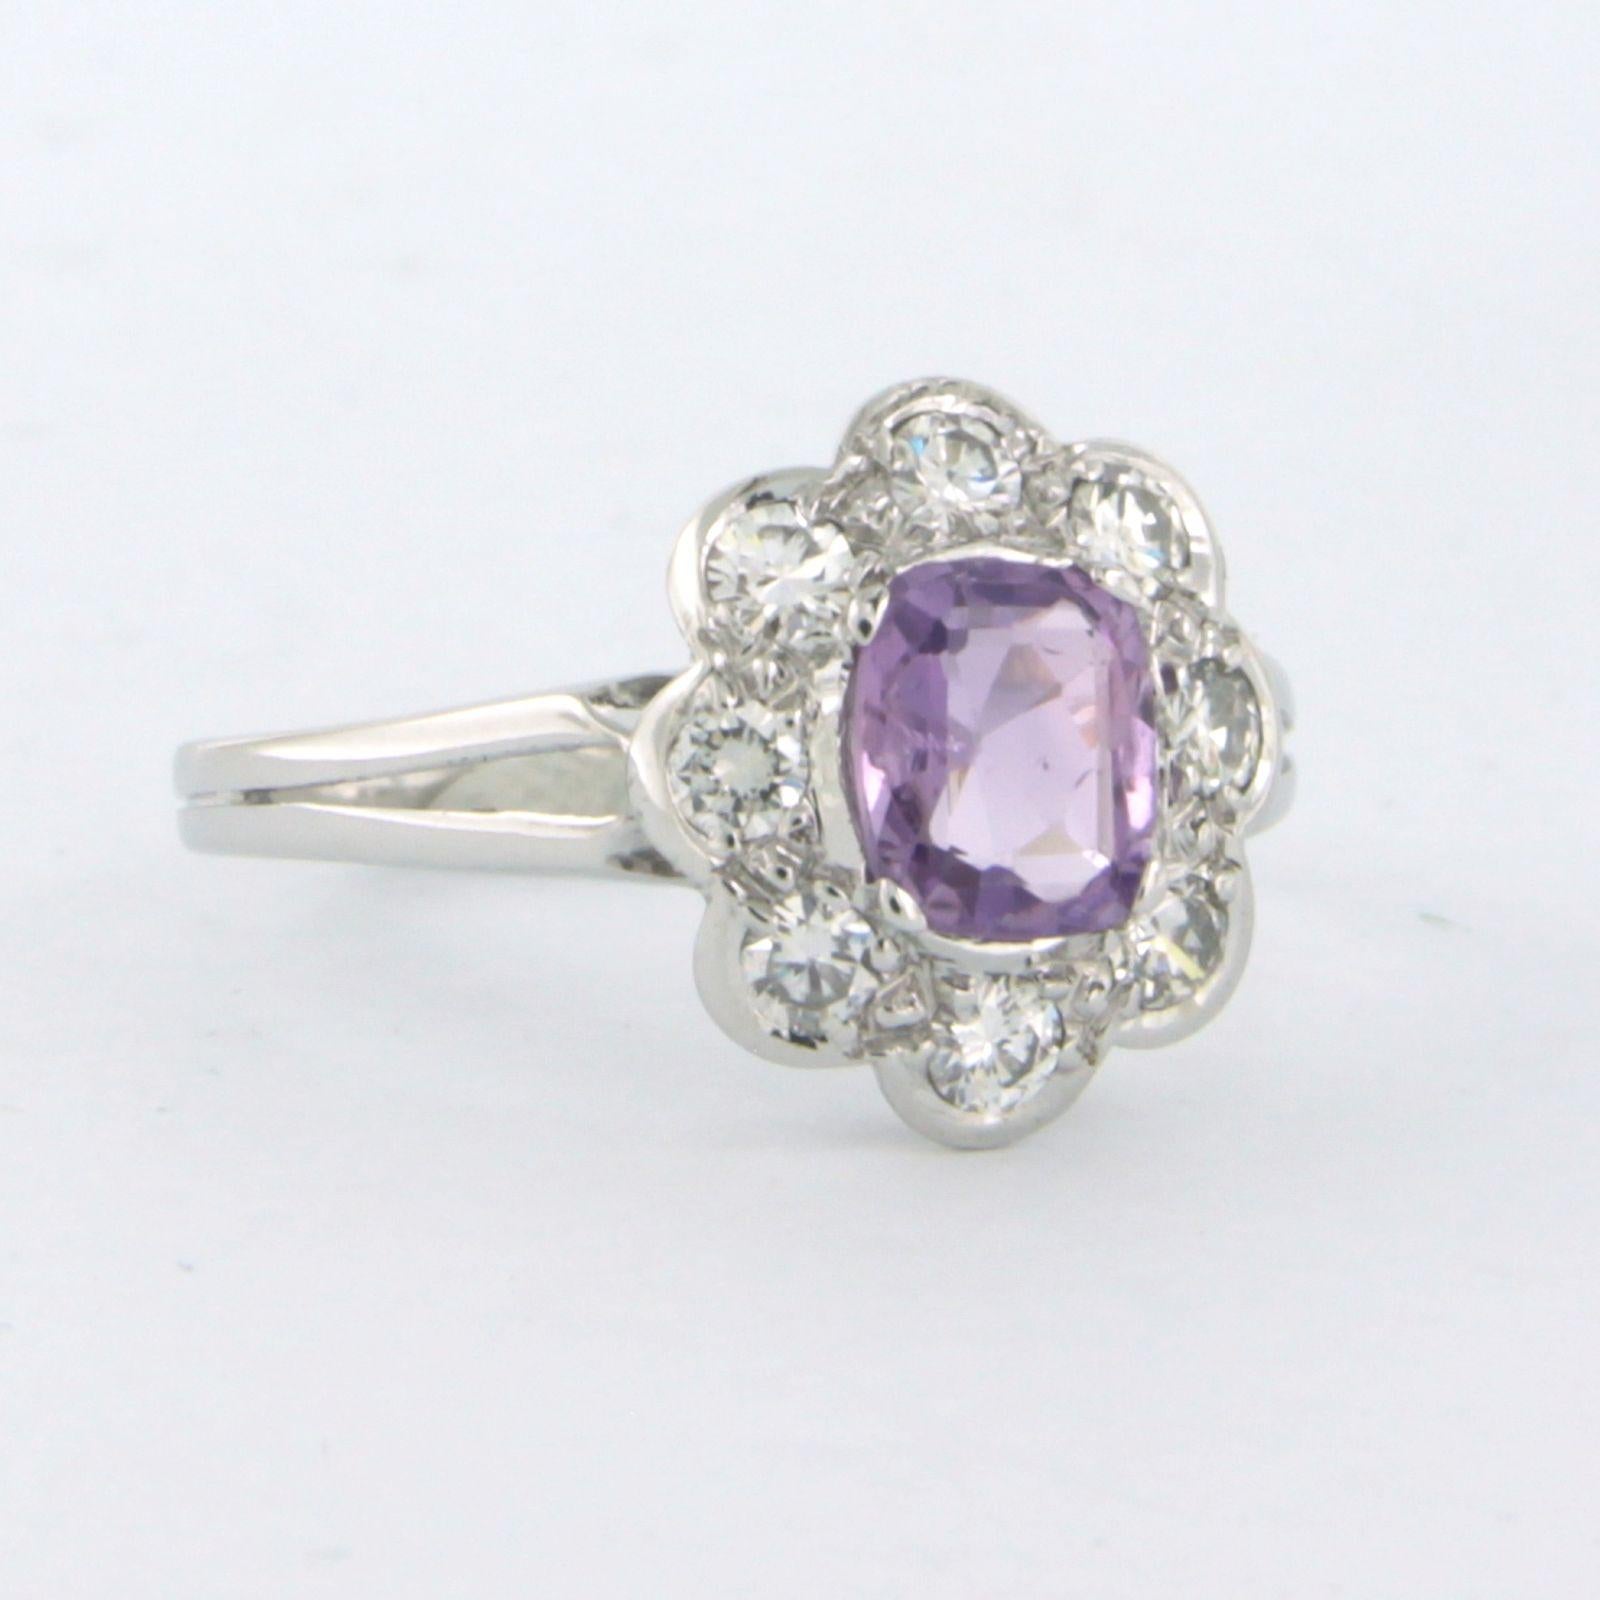 18k white gold entourage ring set with pink sapphire to. 0.95ct and brilliant cut diamond up to. 0.40ct - F/G - VS/SI - ring size 6.5 (17/53)

Detailed description

the top of the ring is 1.3 cm wide

Ring size 6.5 (17/53), the ring can be enlarged